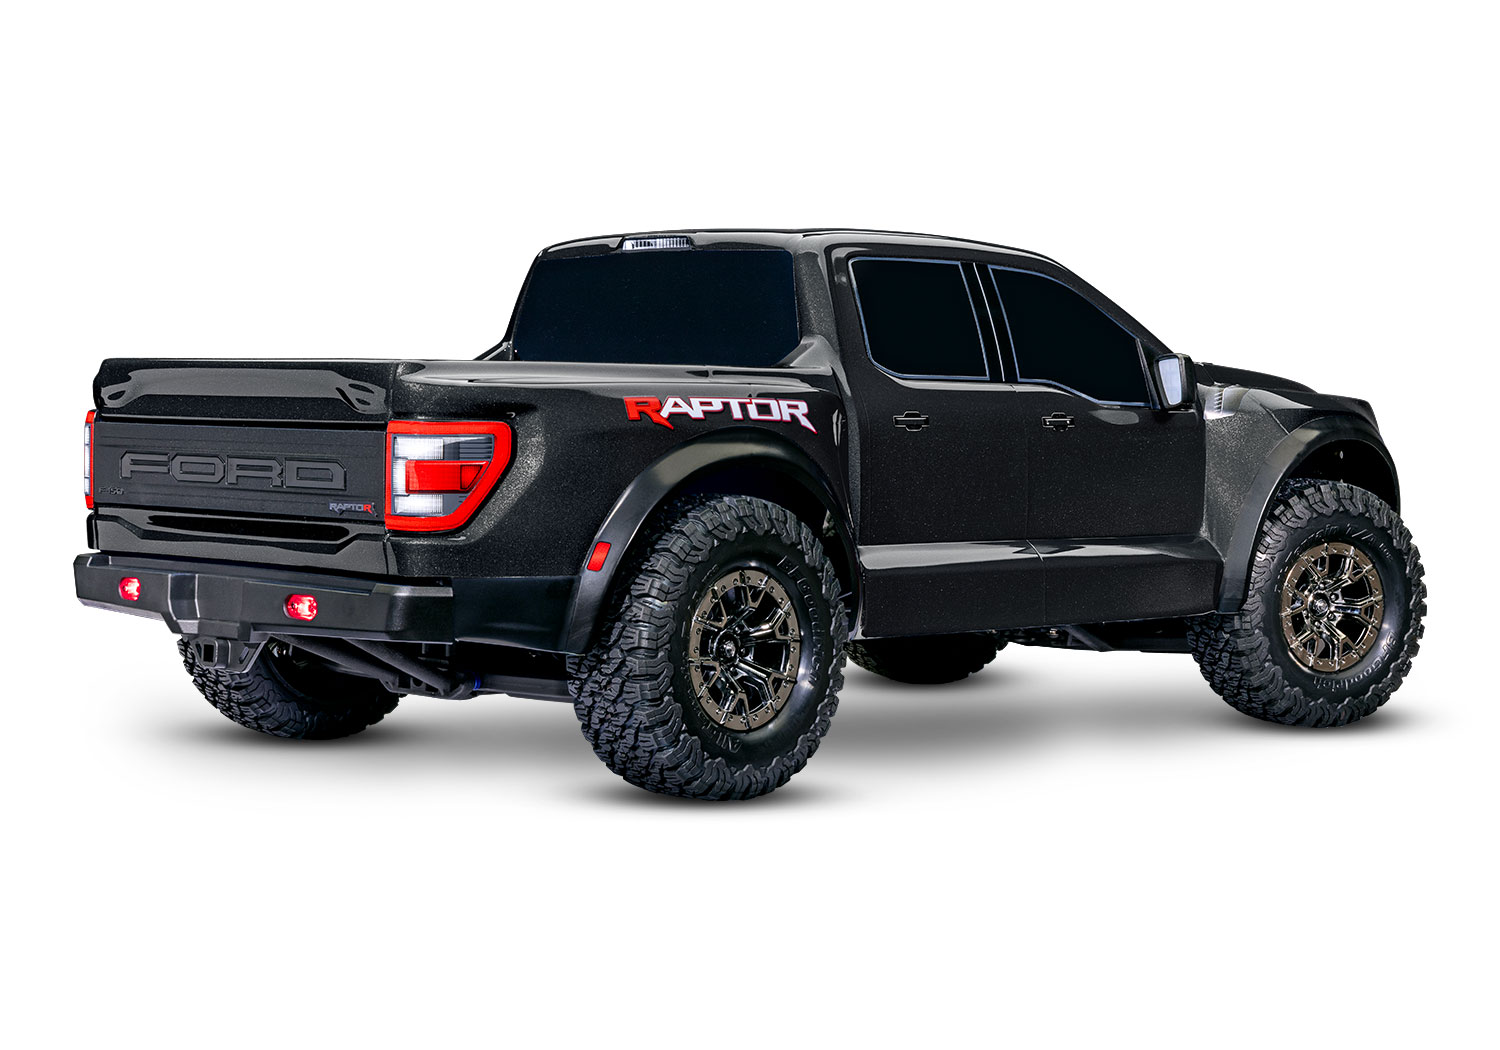 Traxxas Ford F-150 Raptor R 4x4 VXL 1:10 4WD Brushless Truck